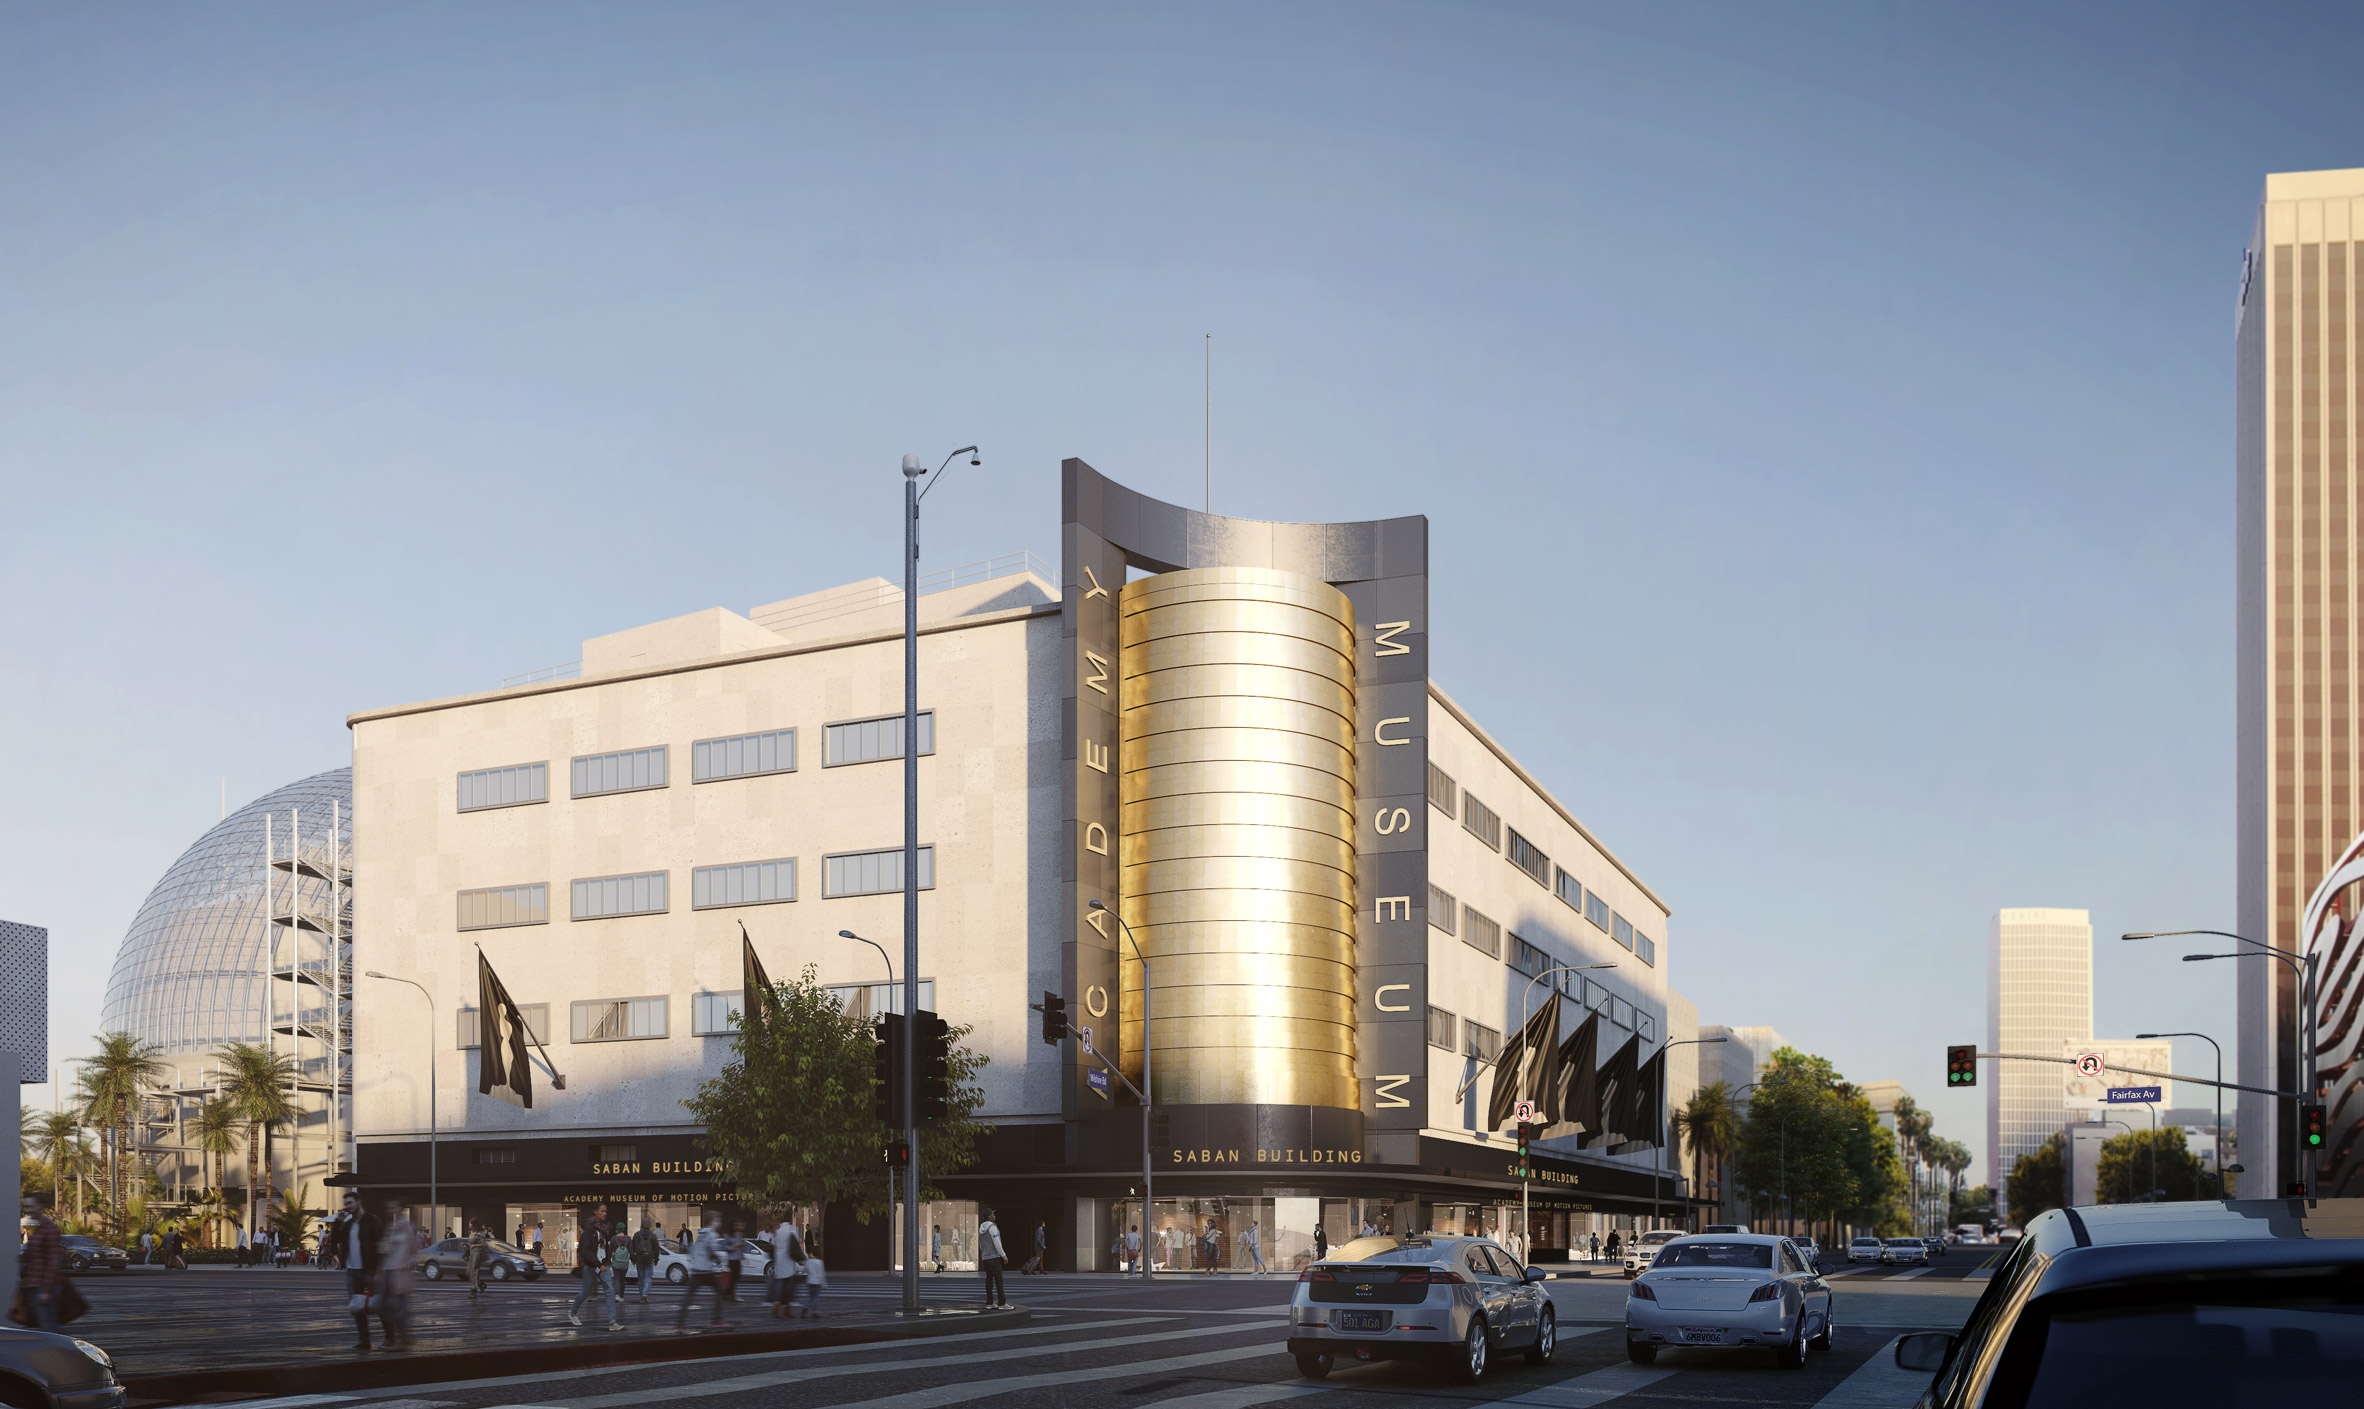 Academy Museum of Motion Pictures by Renzo Piano